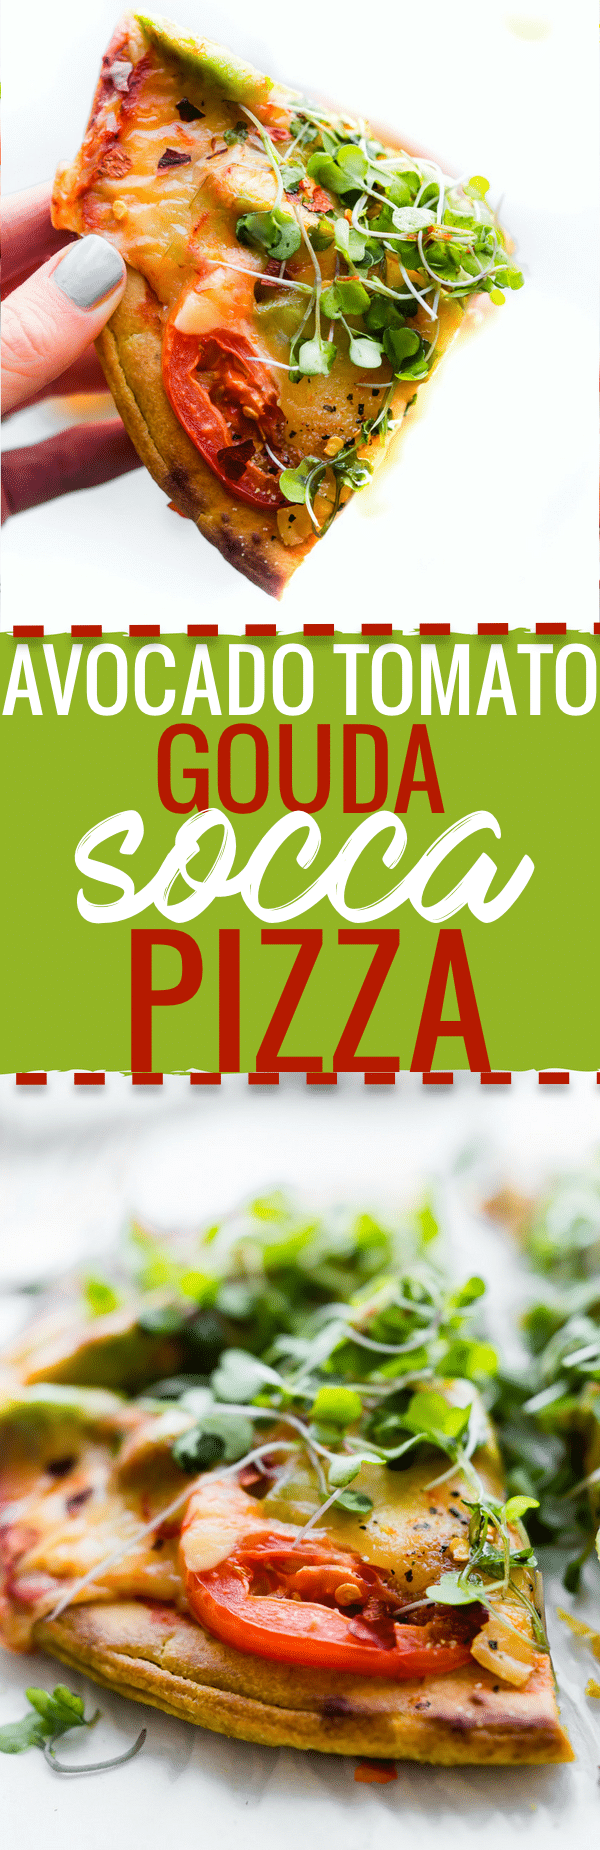 This Avocado Tomato Gouda Socca Pizza recipe is gonna make you fall in love WITH pizza even more! Grain free, gluten free, Seriously easy to make, egg free, vegan option, delicious! www.cottercrunch.com